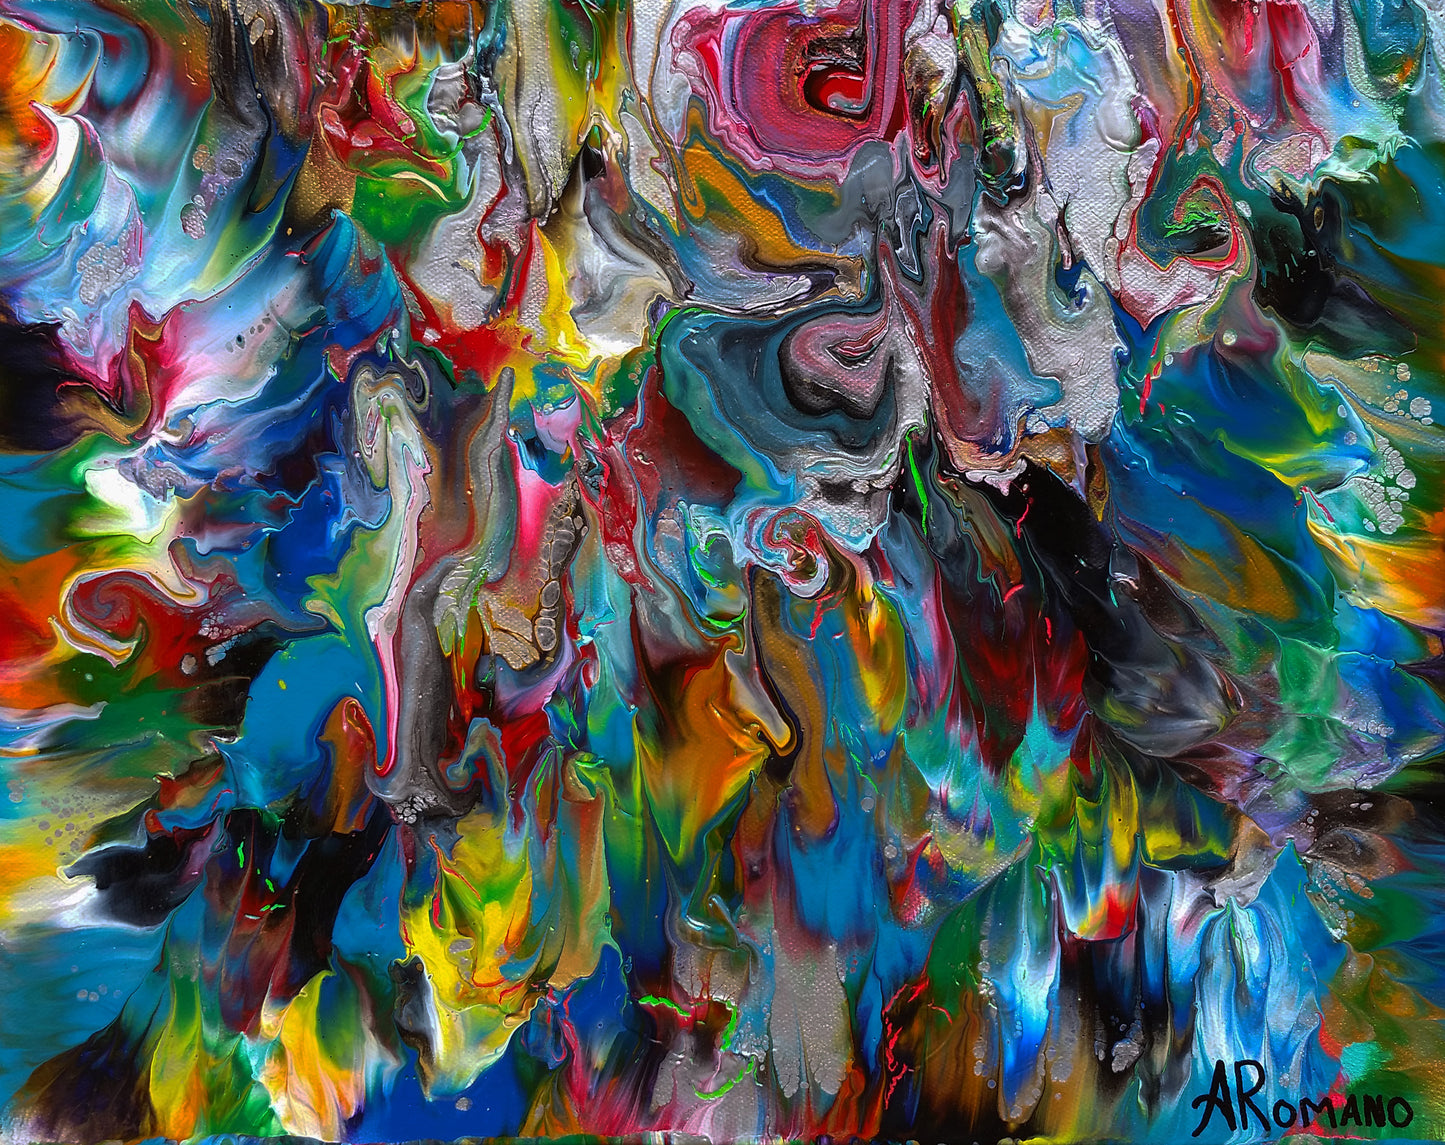 Psychedelic-Garden-Original-art-buy-Abstract-Fluid-Painting-Colorful-Art-Happy-Floral-acrylics